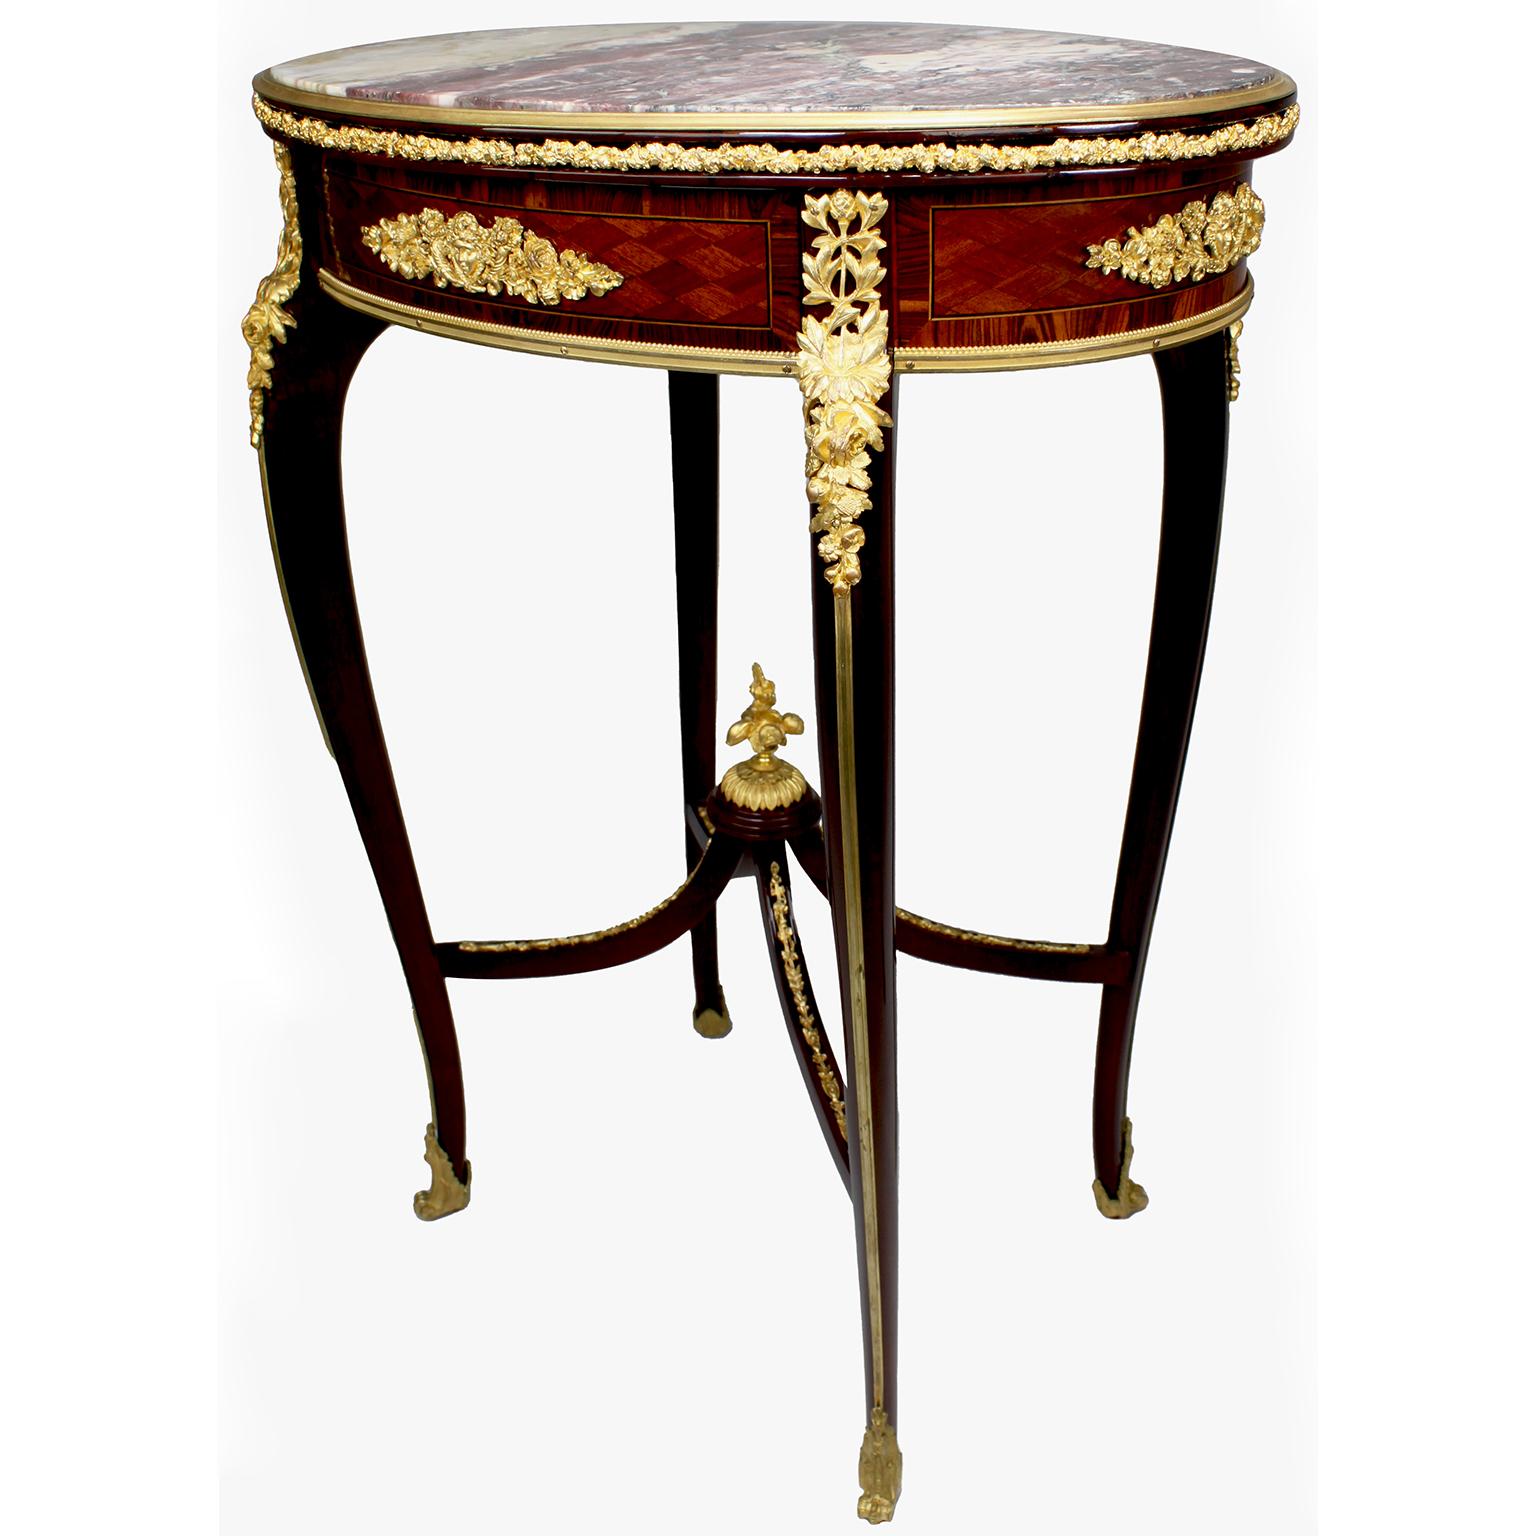 A very fine French 19th-early 20th century Louis XV style mahogany, tulipwood, parquetry and ormolu mounted oval gueridon side table with a Brêche Violette marble top, attributed to François Linke (1855-1946). The inset oval Brêche Violette marble